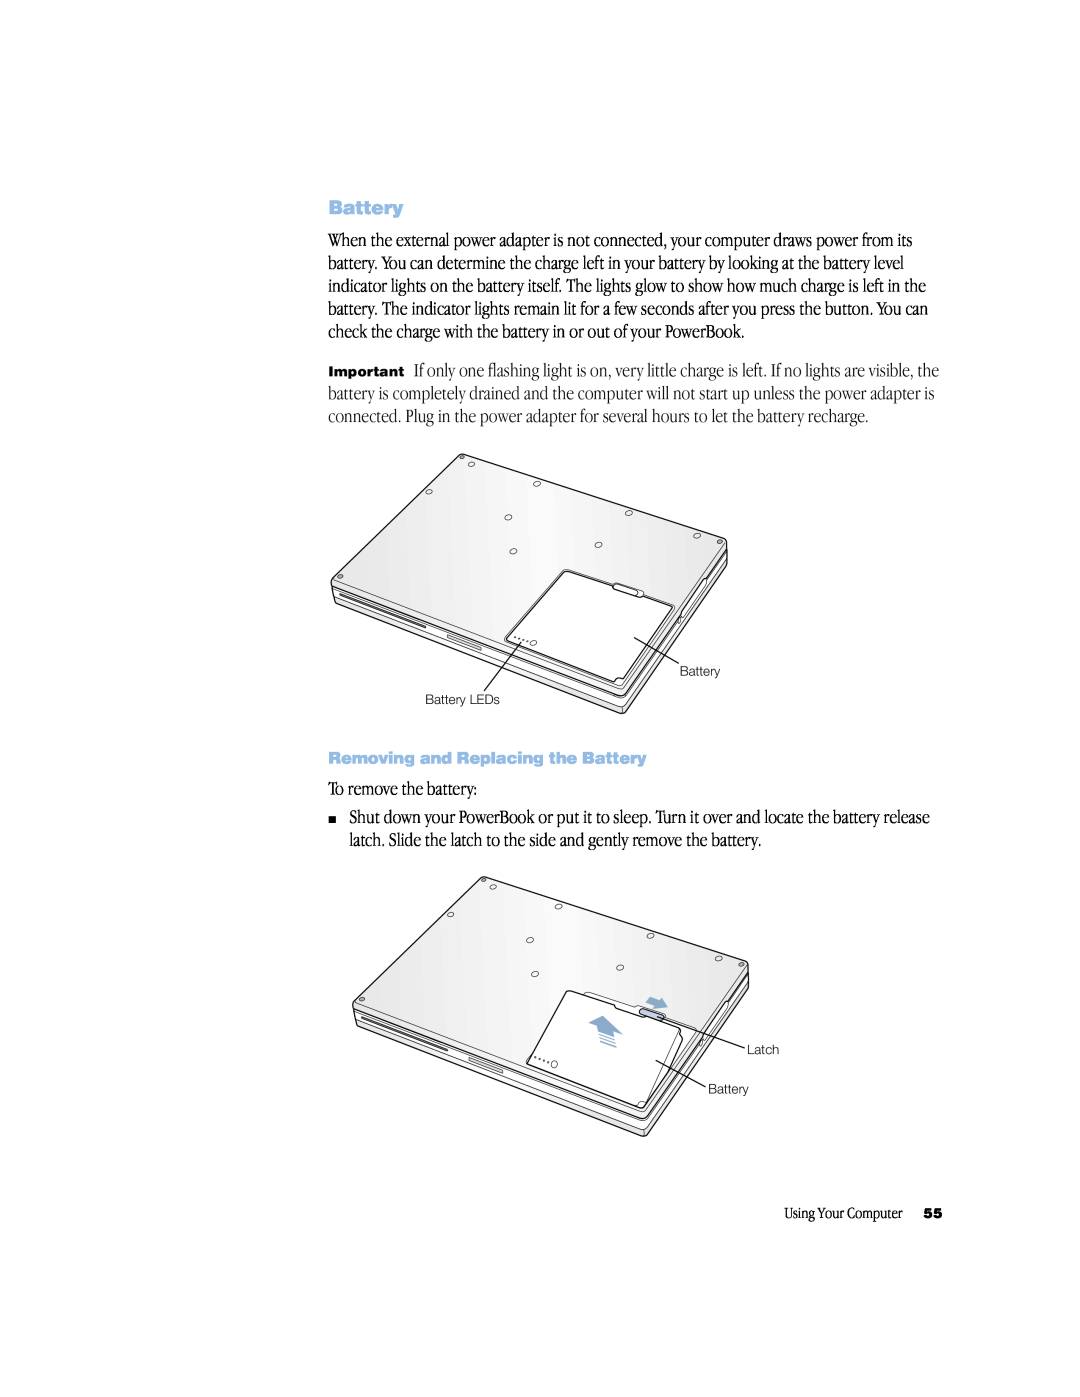 Apple powerbook g4 manual To remove the battery, Removing and Replacing the Battery, Using Your Computer 